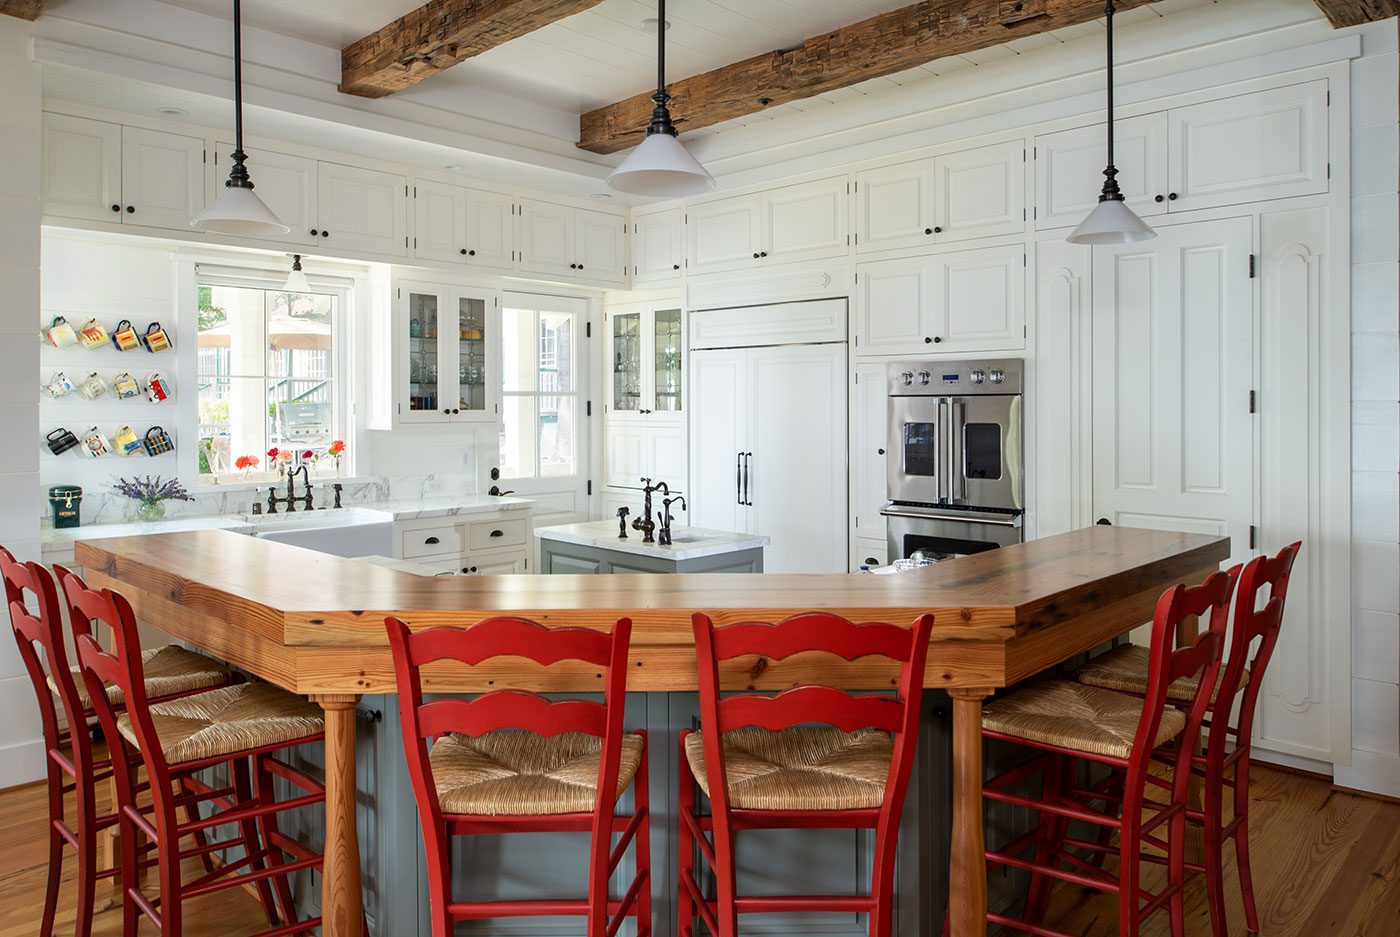 The mostly all white kitchen iis set off by bright red raise bar chairs and wood accents in the surrounding bar countertops framing the kitchen's cooking space in replacement of a traditional kitchen island